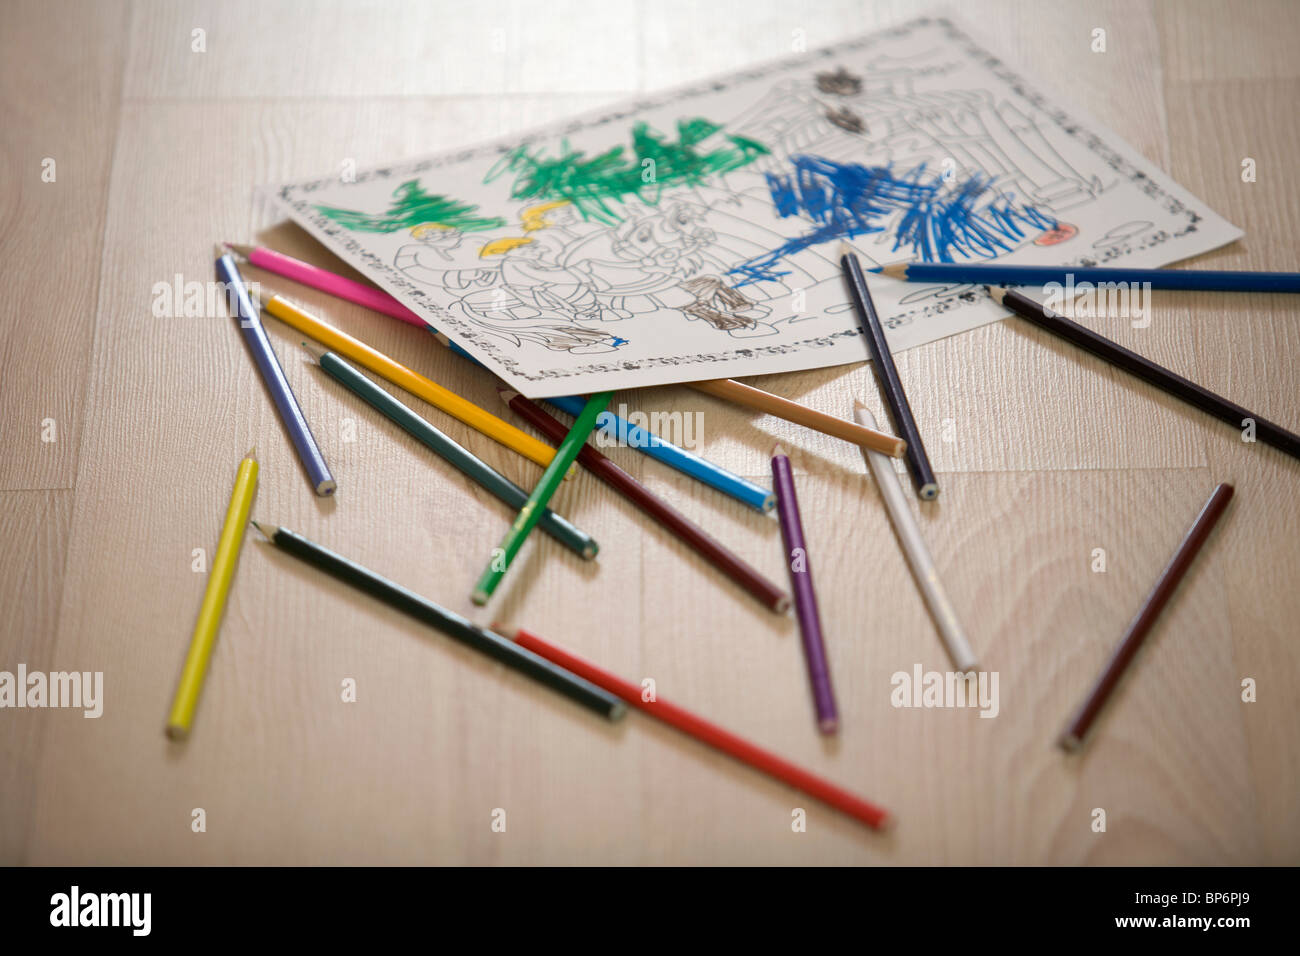 A coloring book page and colored pencils, still life Stock Photo